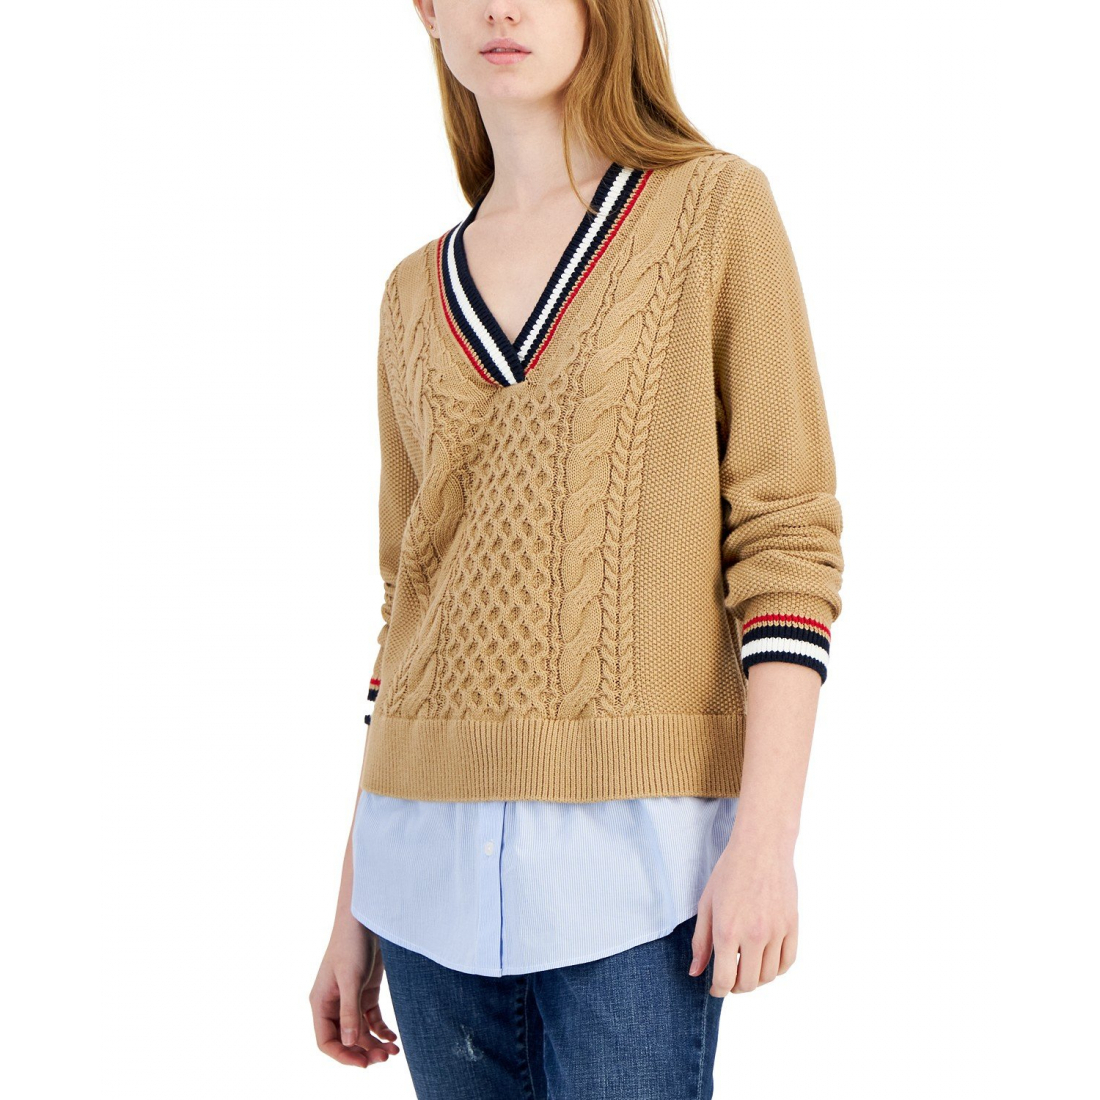 Women's 'Cable-Knit Layered-Look' Sweater